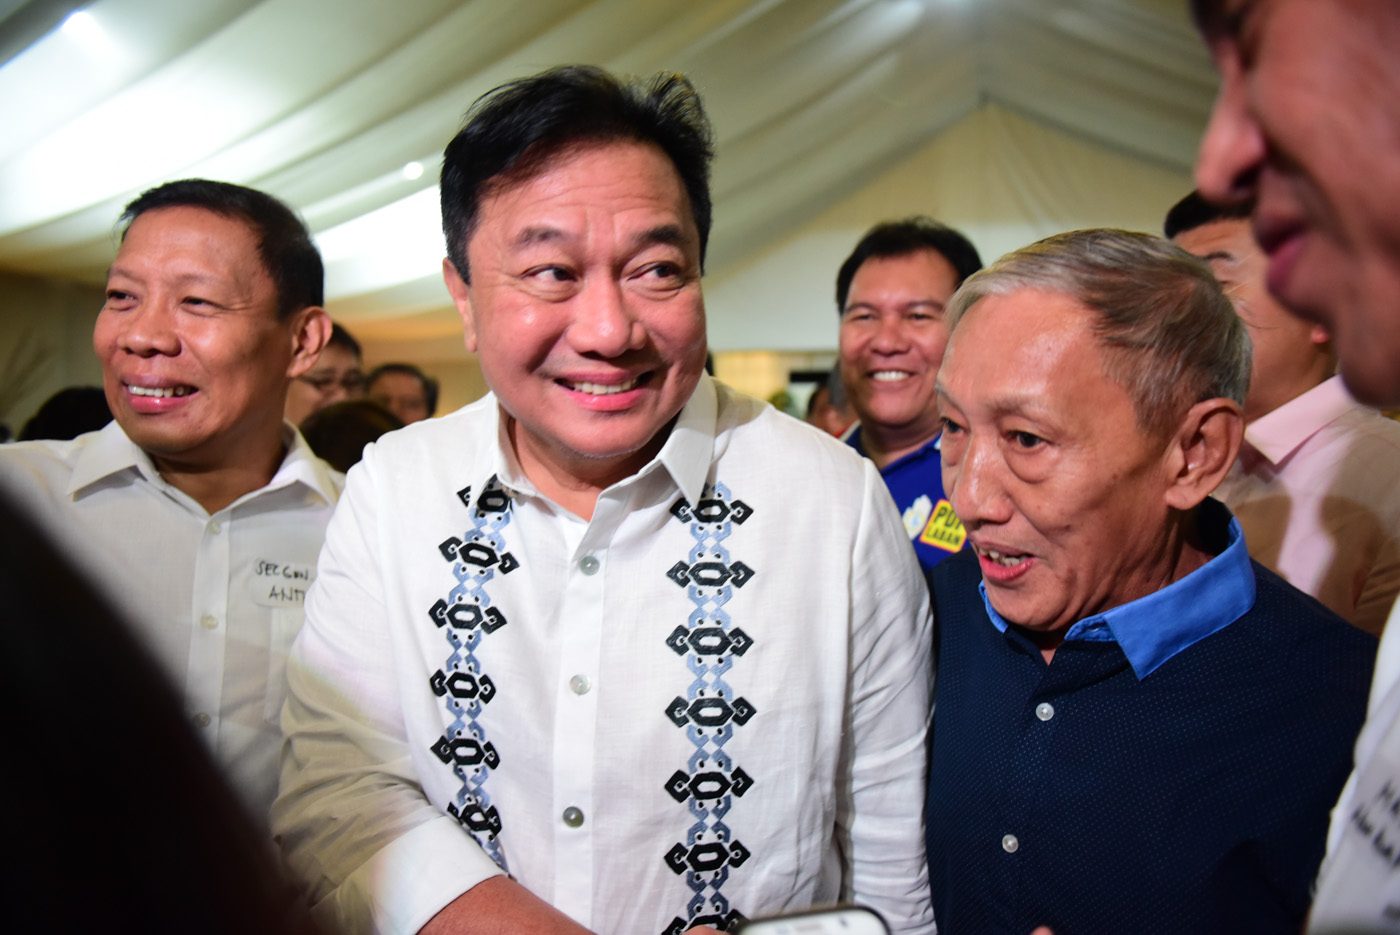 Alvarez: We’re not rushing the death penalty bill in the House